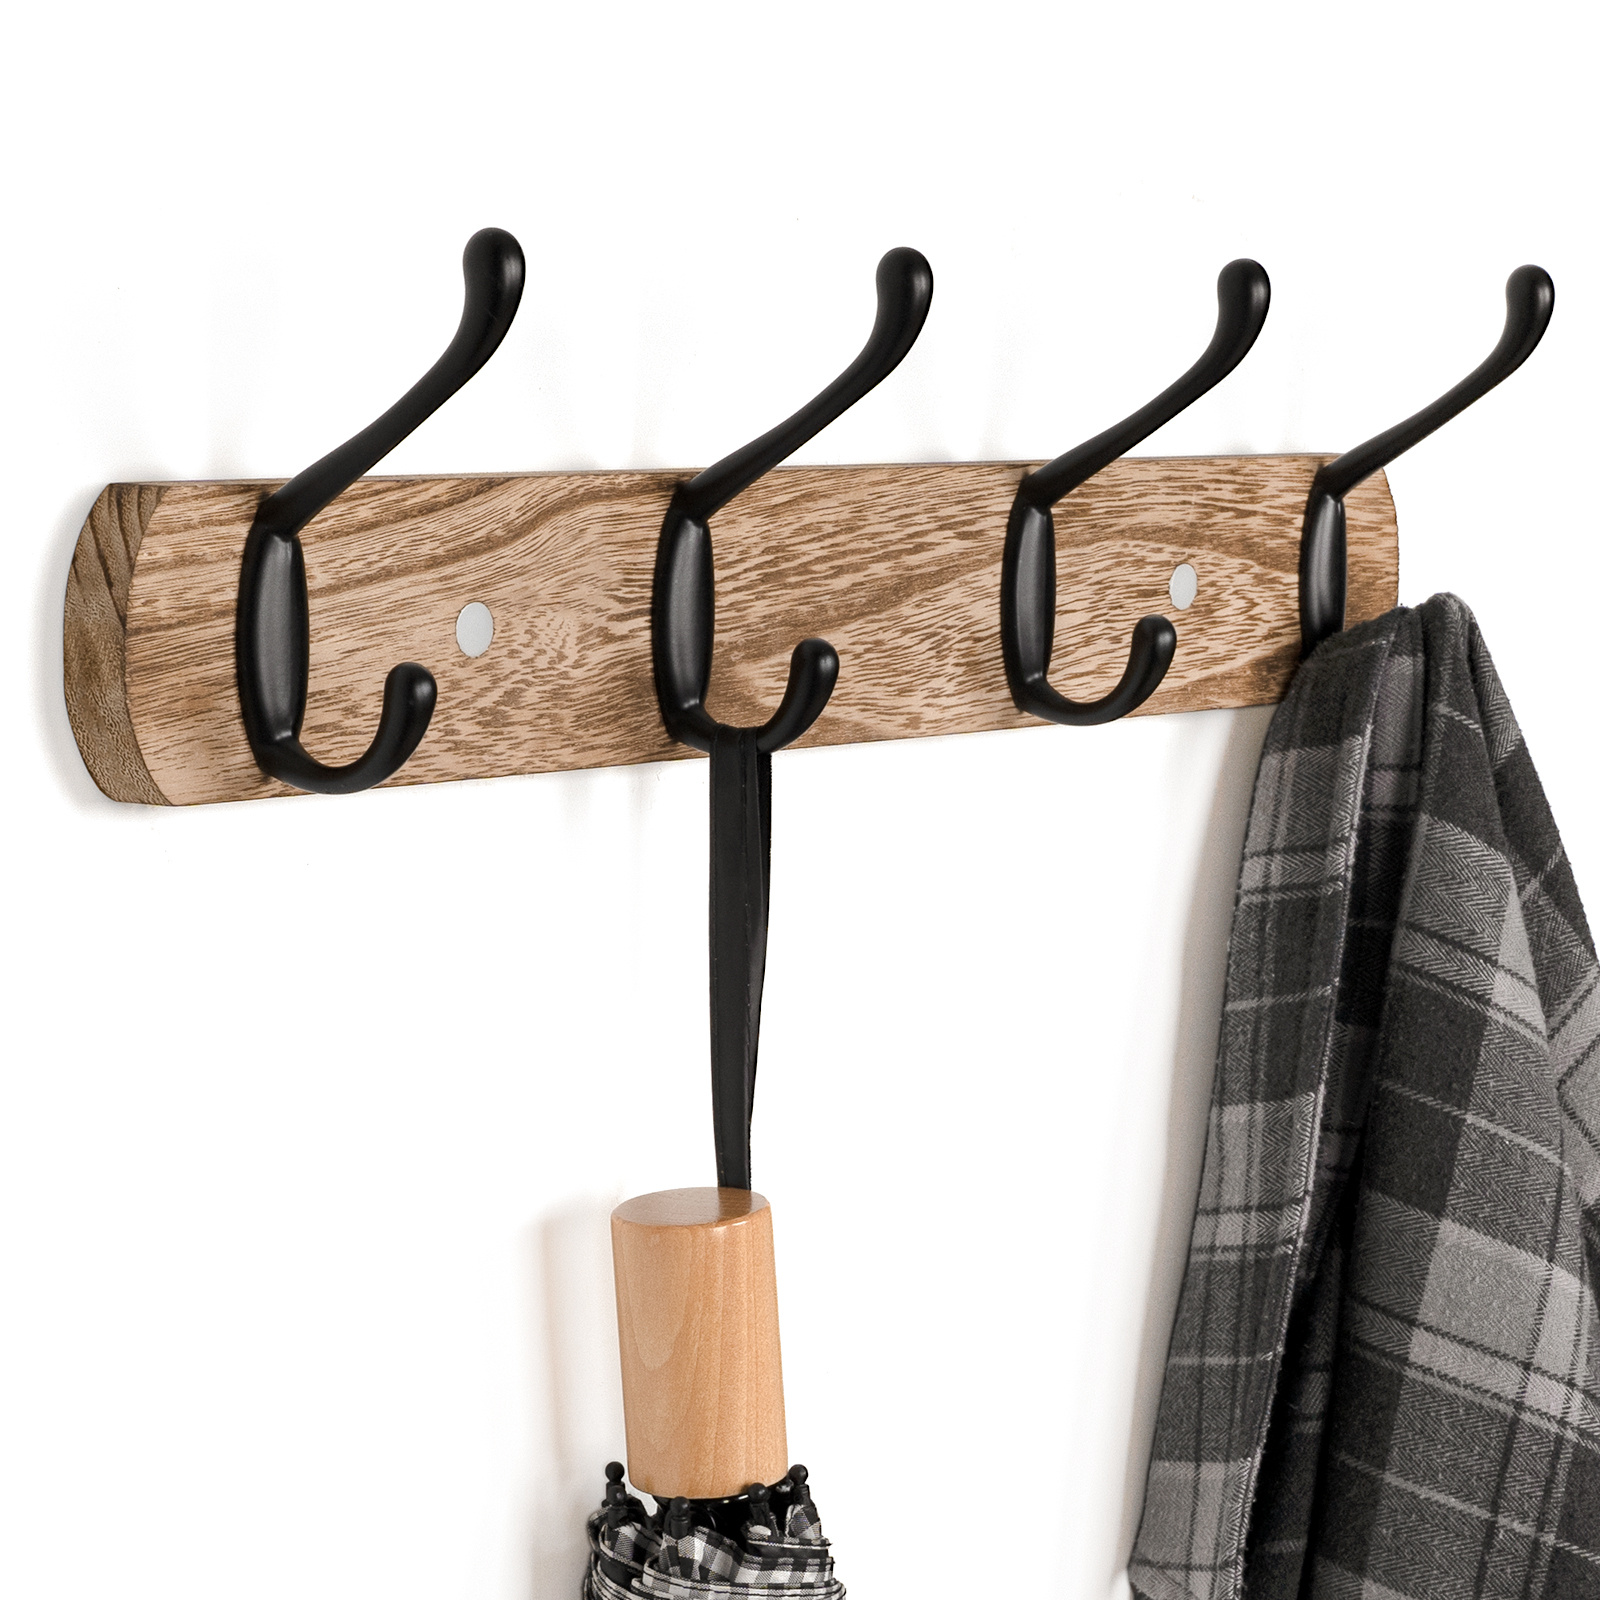 

1pc Wall Mounted Coat Rack, Wood Coat Hanger With 4 Hooks, Storage Rack For Hanging Coat, Wall Hangers Coat Rack For Entryway Living Room Bedroom, Home Storage And Organization, Home Essentials